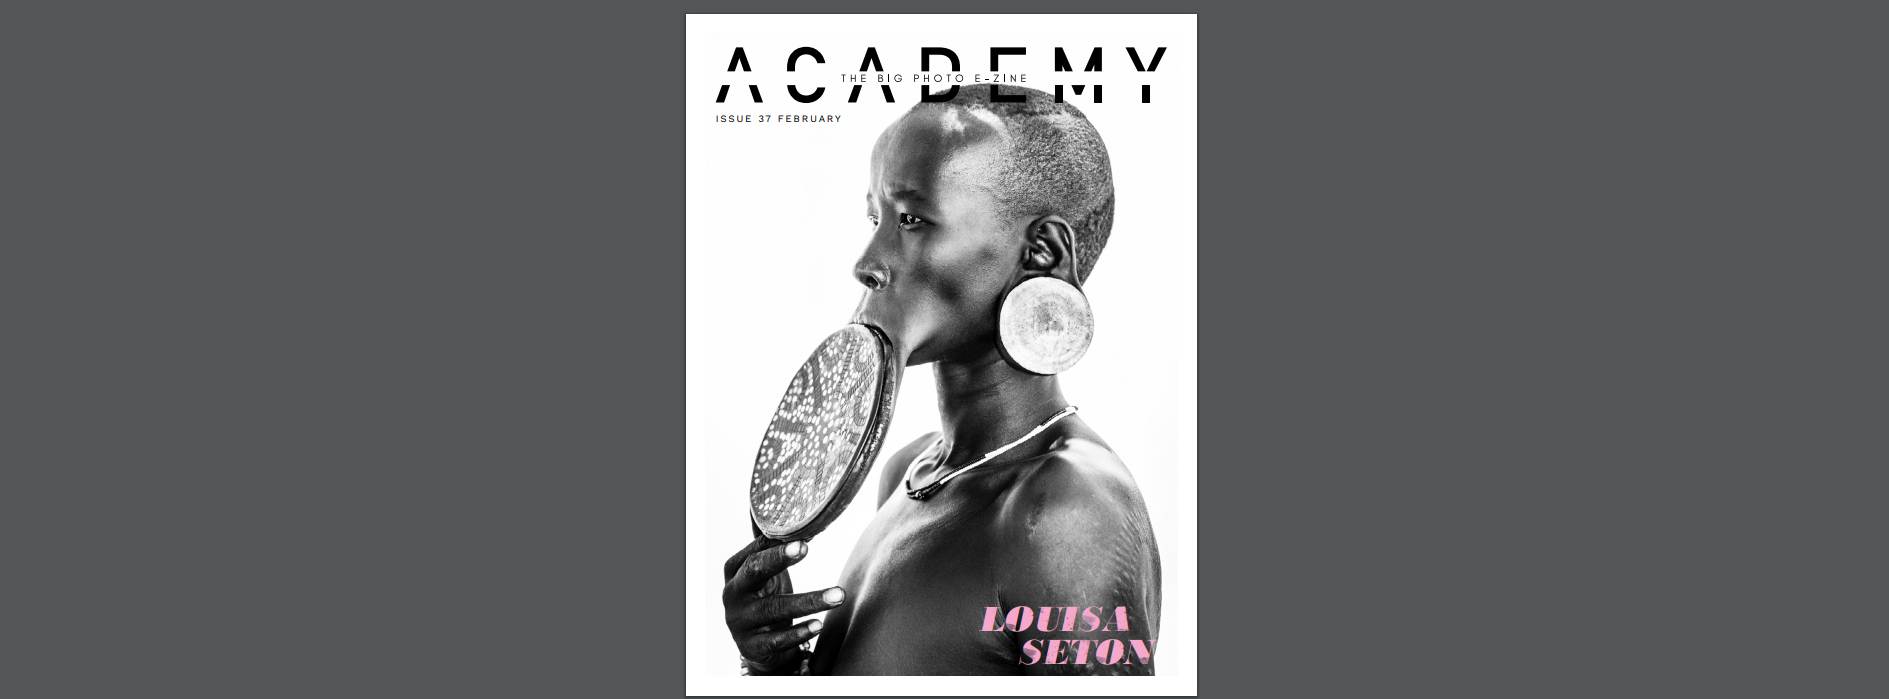 Academy photography magazine front cover